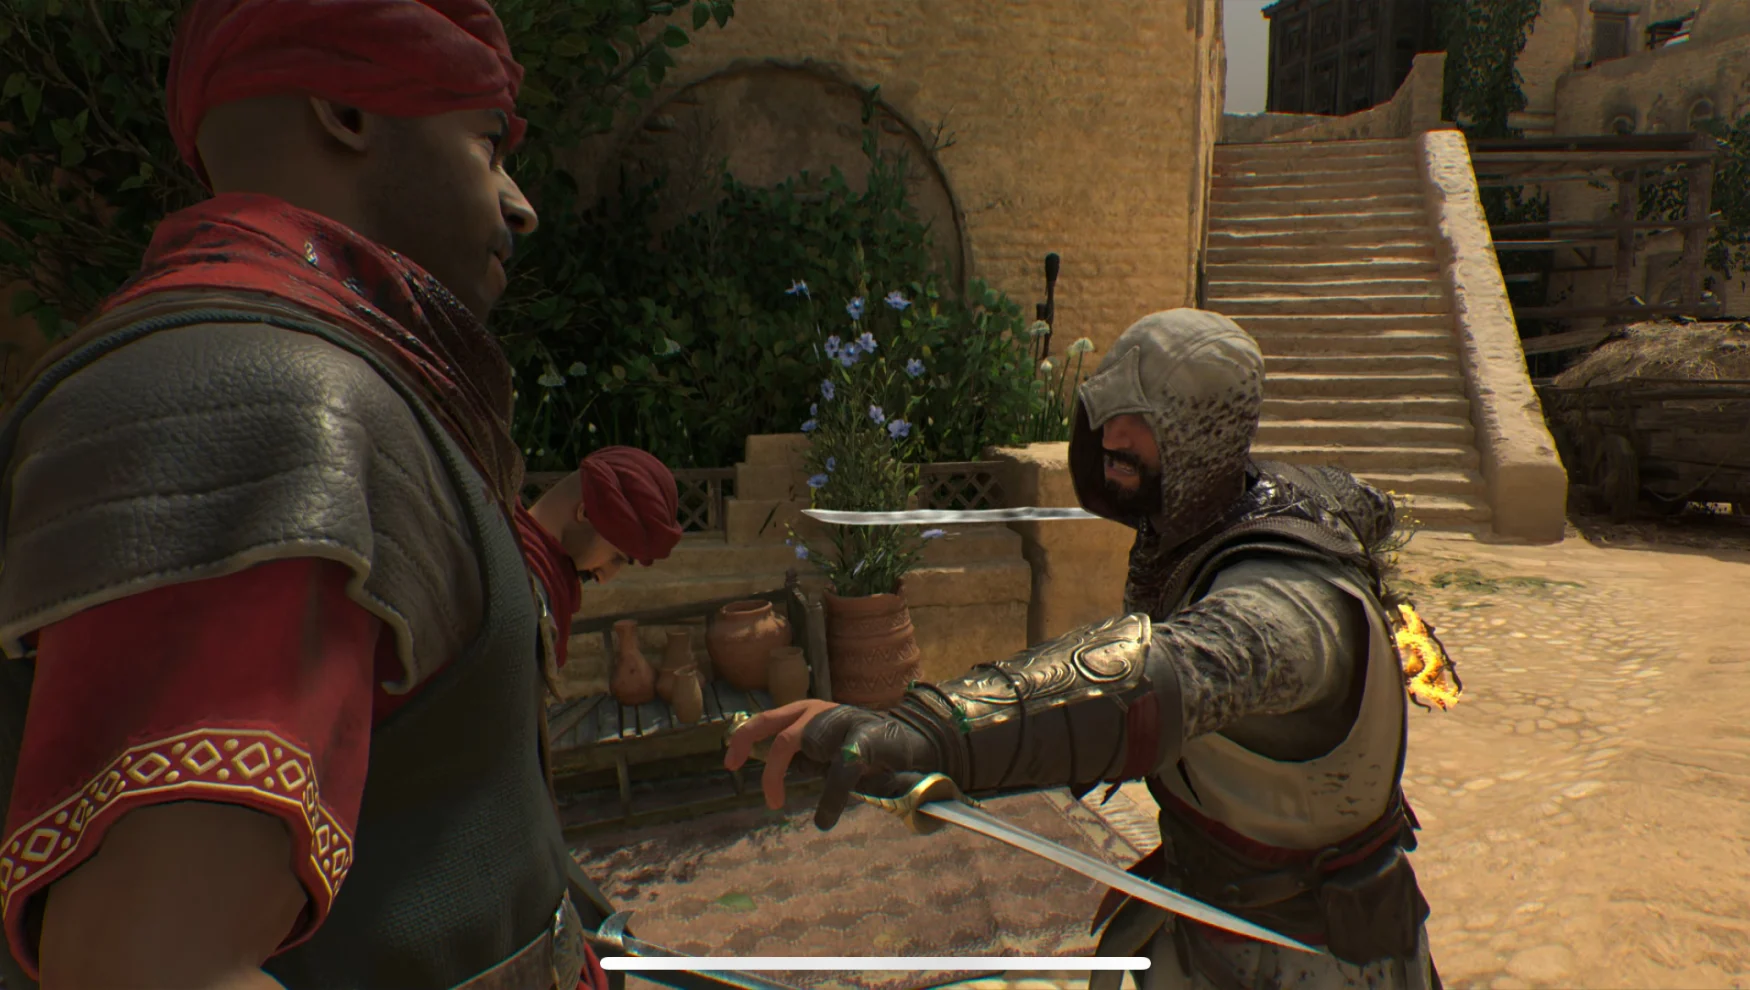 A hooded figure prepares to thrust his sword through an enemy in Assassin's Creed Mirage.